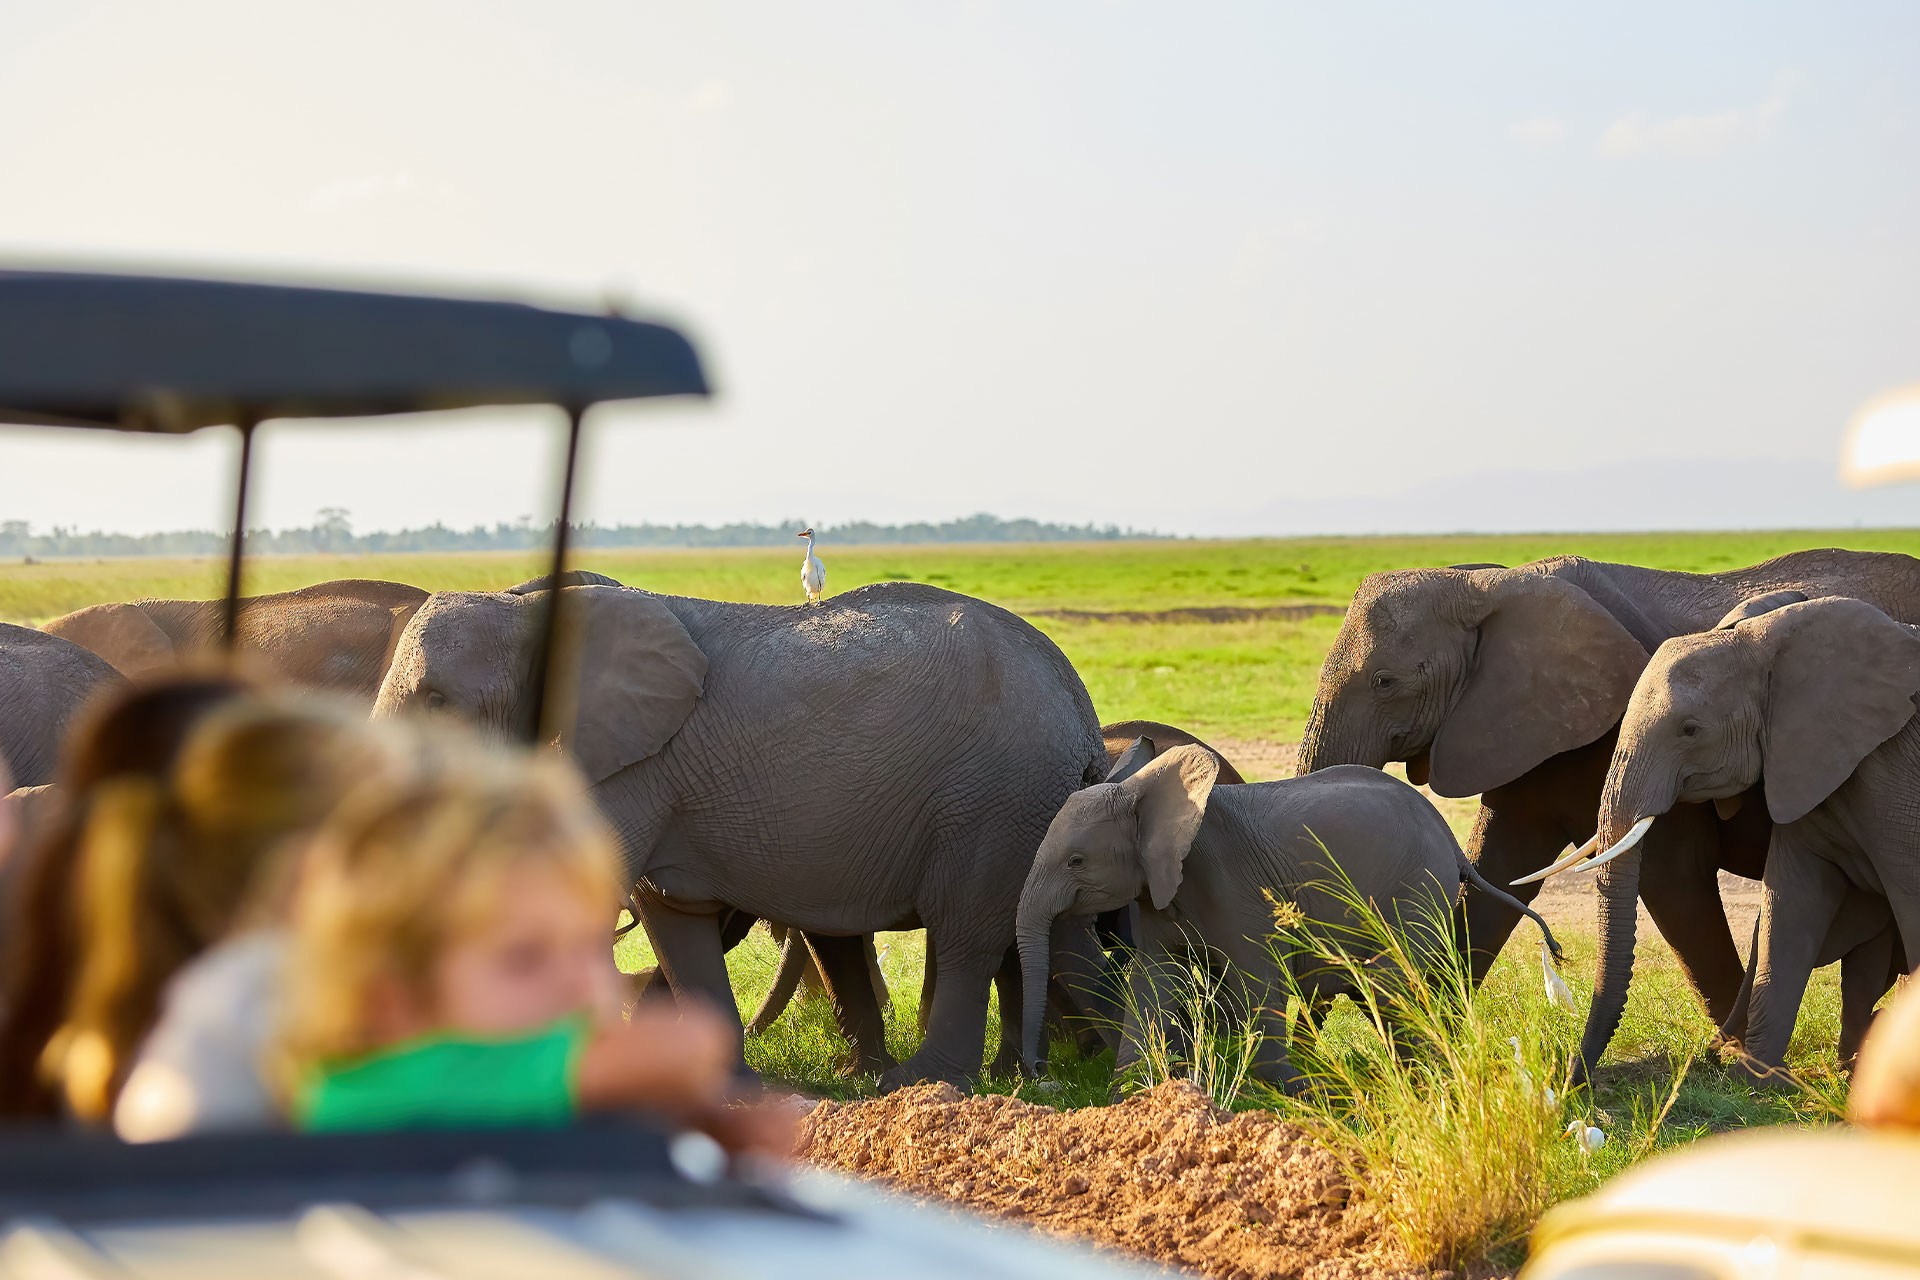 Young children on a game drive vehicle looking at elephants during sustainable safaris with Grand Africa Safaris